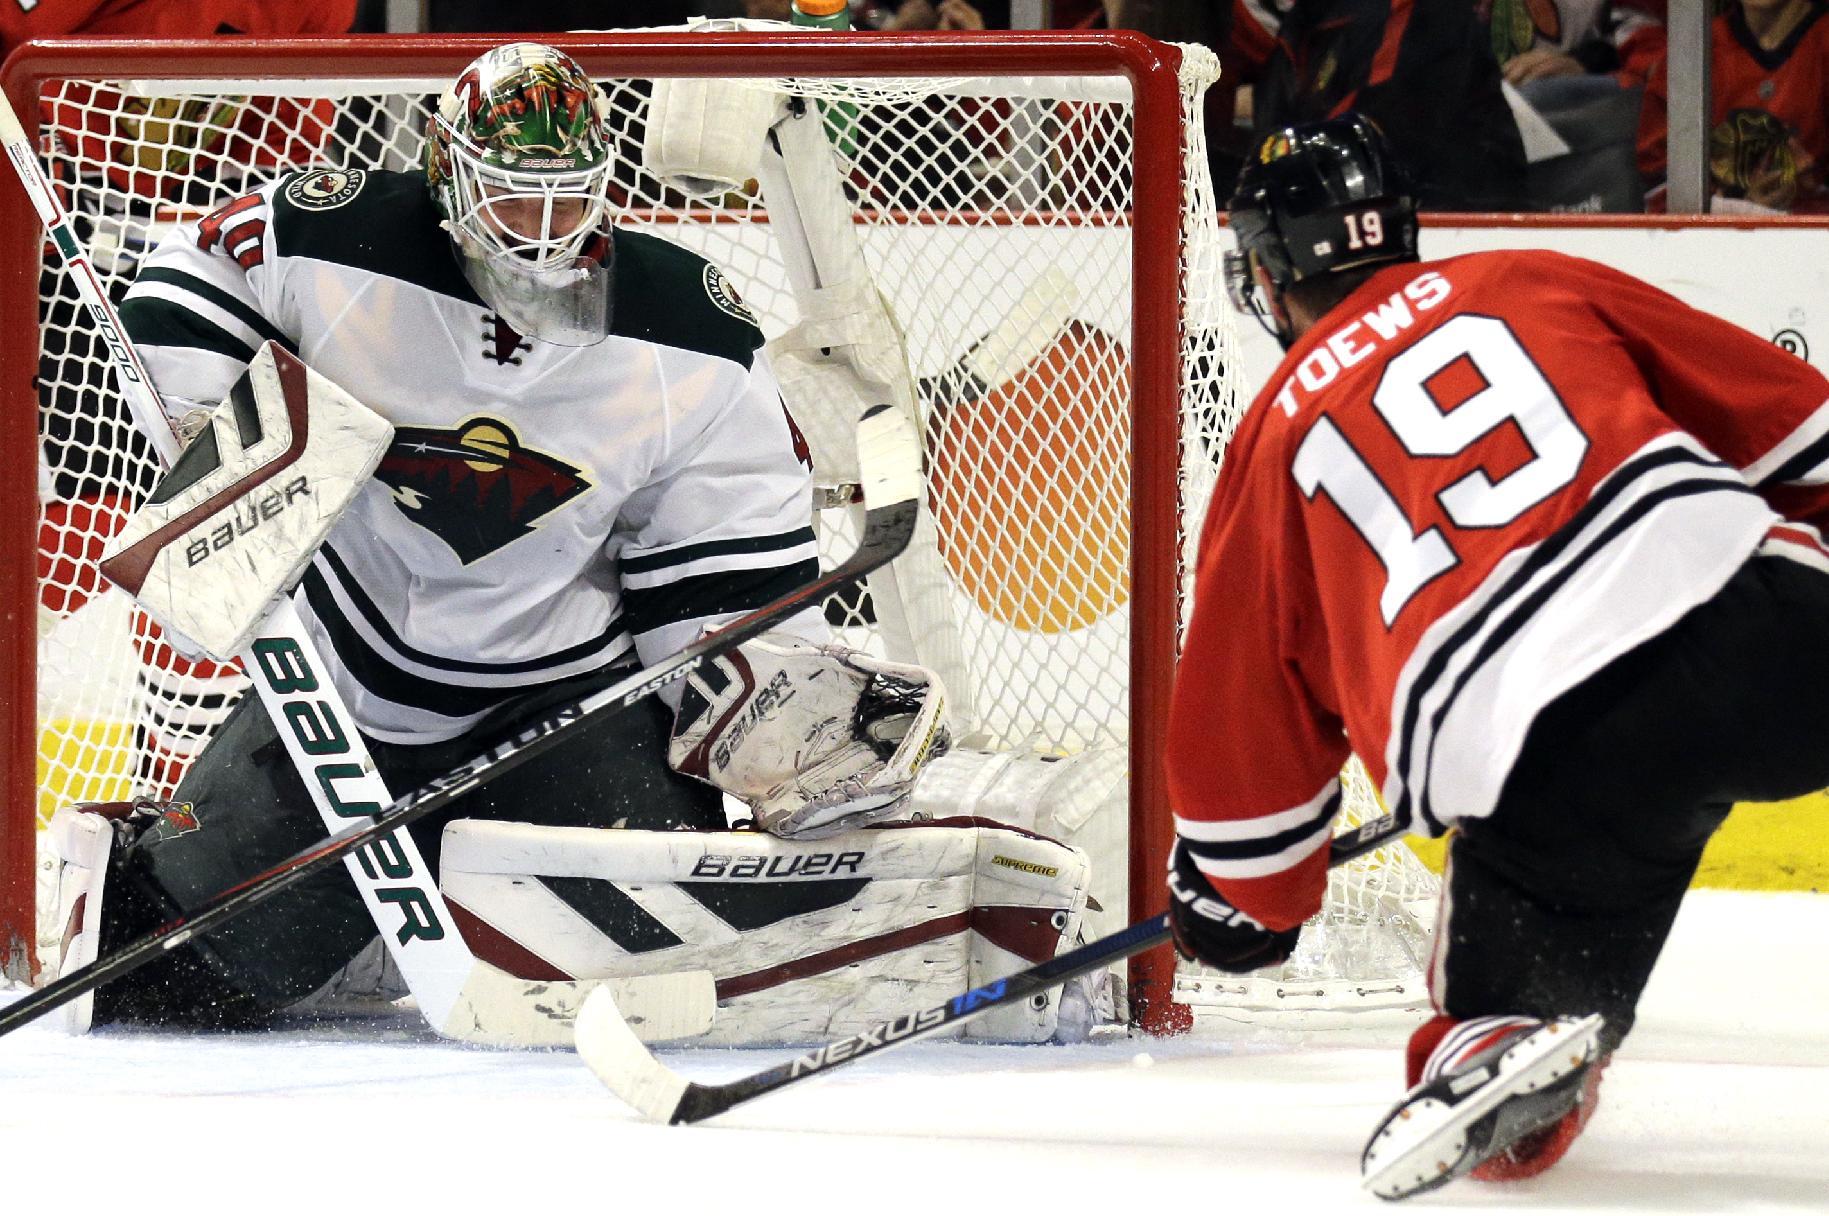 Minnesota Wild goalie Devan Dubnyk, left, fails to stop a shot and goal by Chicago Blackhawks center Jonathan Toews, right, during the second period of Game 2 in the second round of the NHL Stanley Cup hockey playoffs in Chicago, Sunday, May 3, 2015. (AP Photo/Nam Y. Huh)